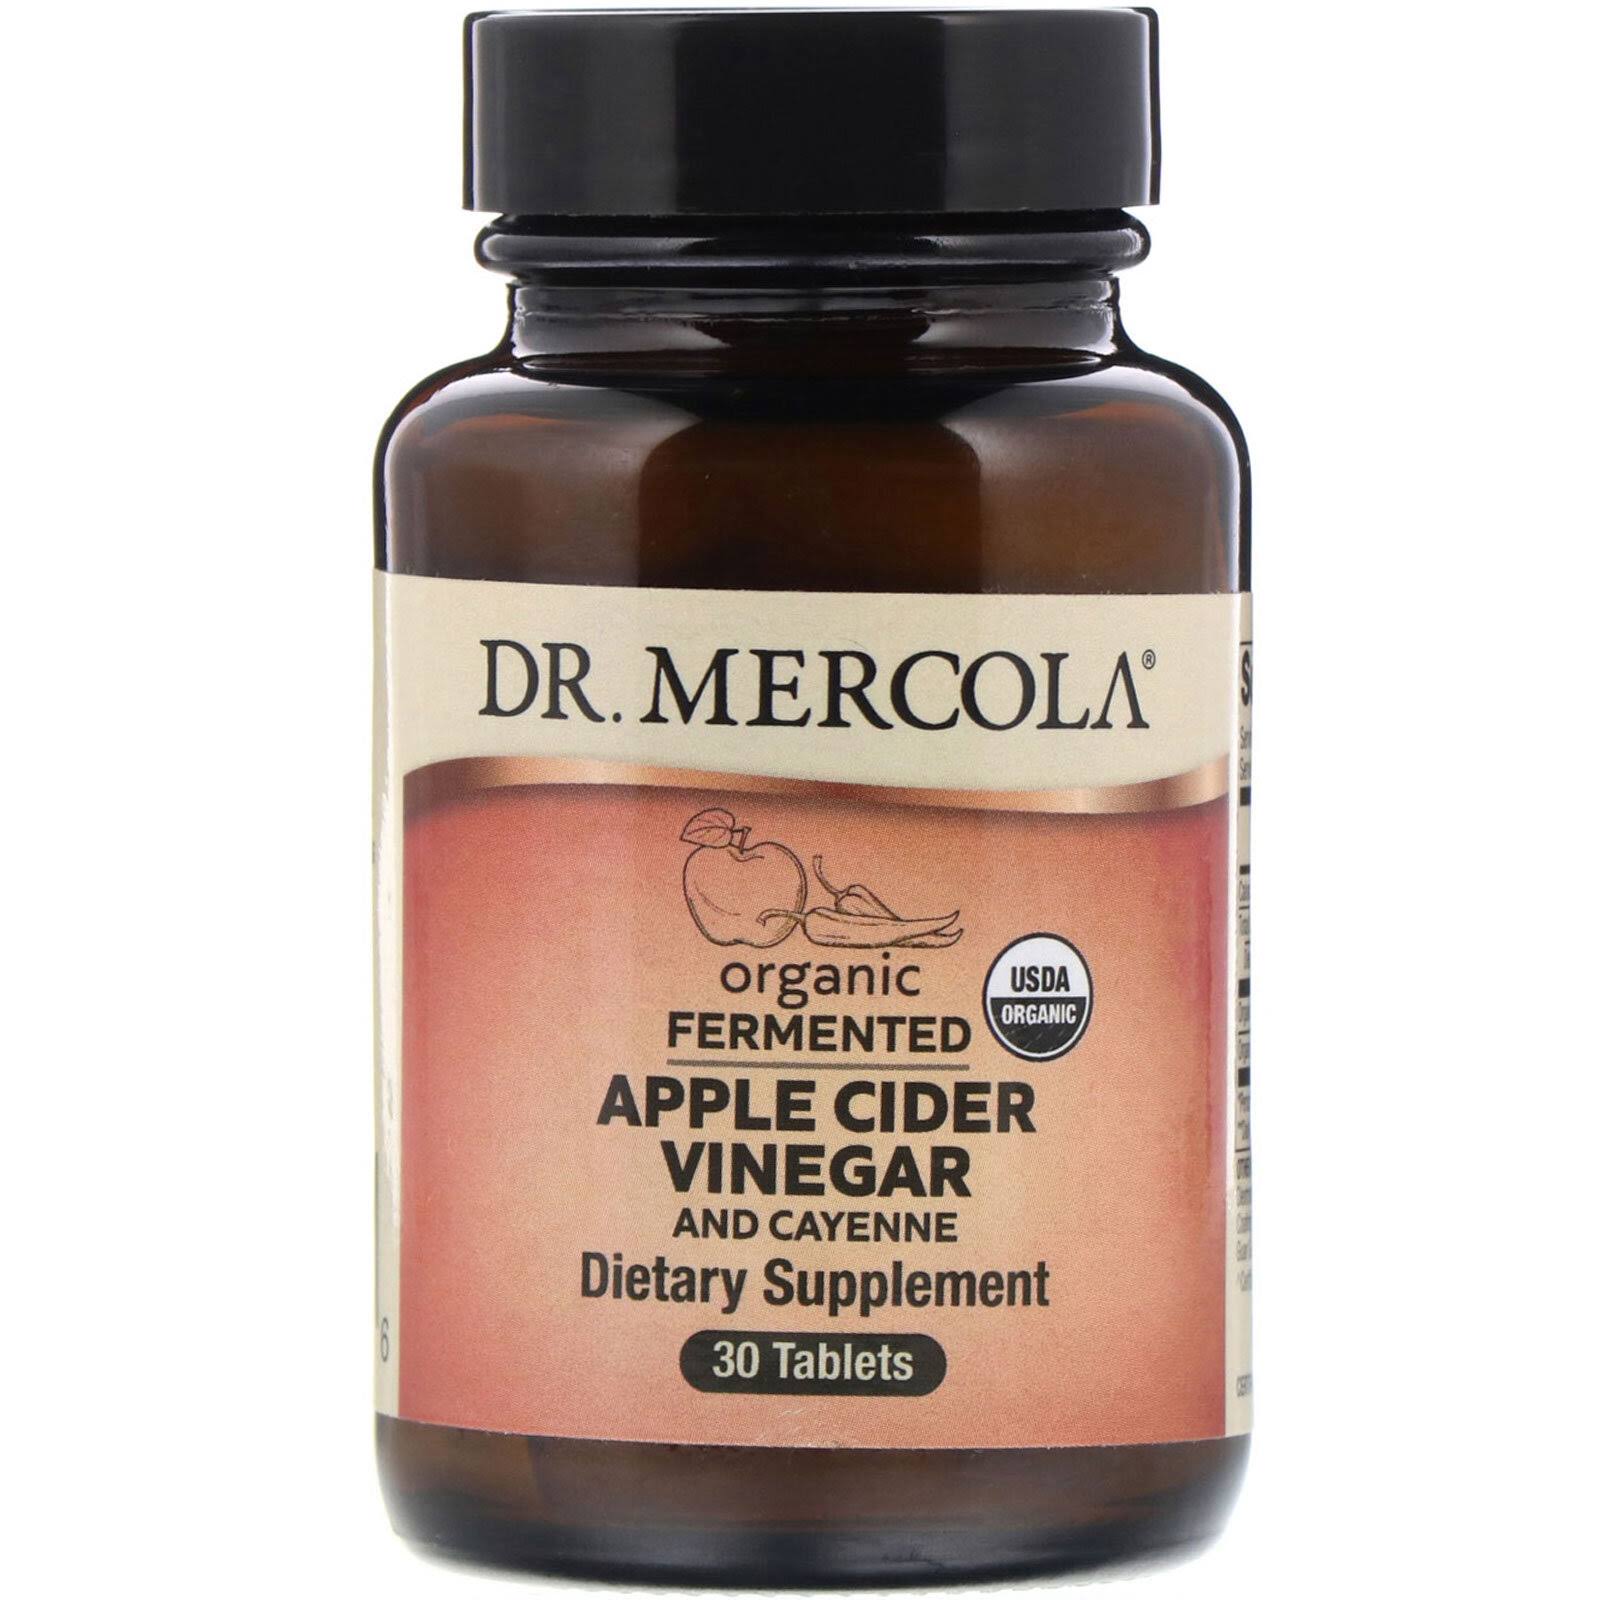 Dr. Mercola Organic Fermented Apple Cider Vinegar and Cayenne - 30 Tablets